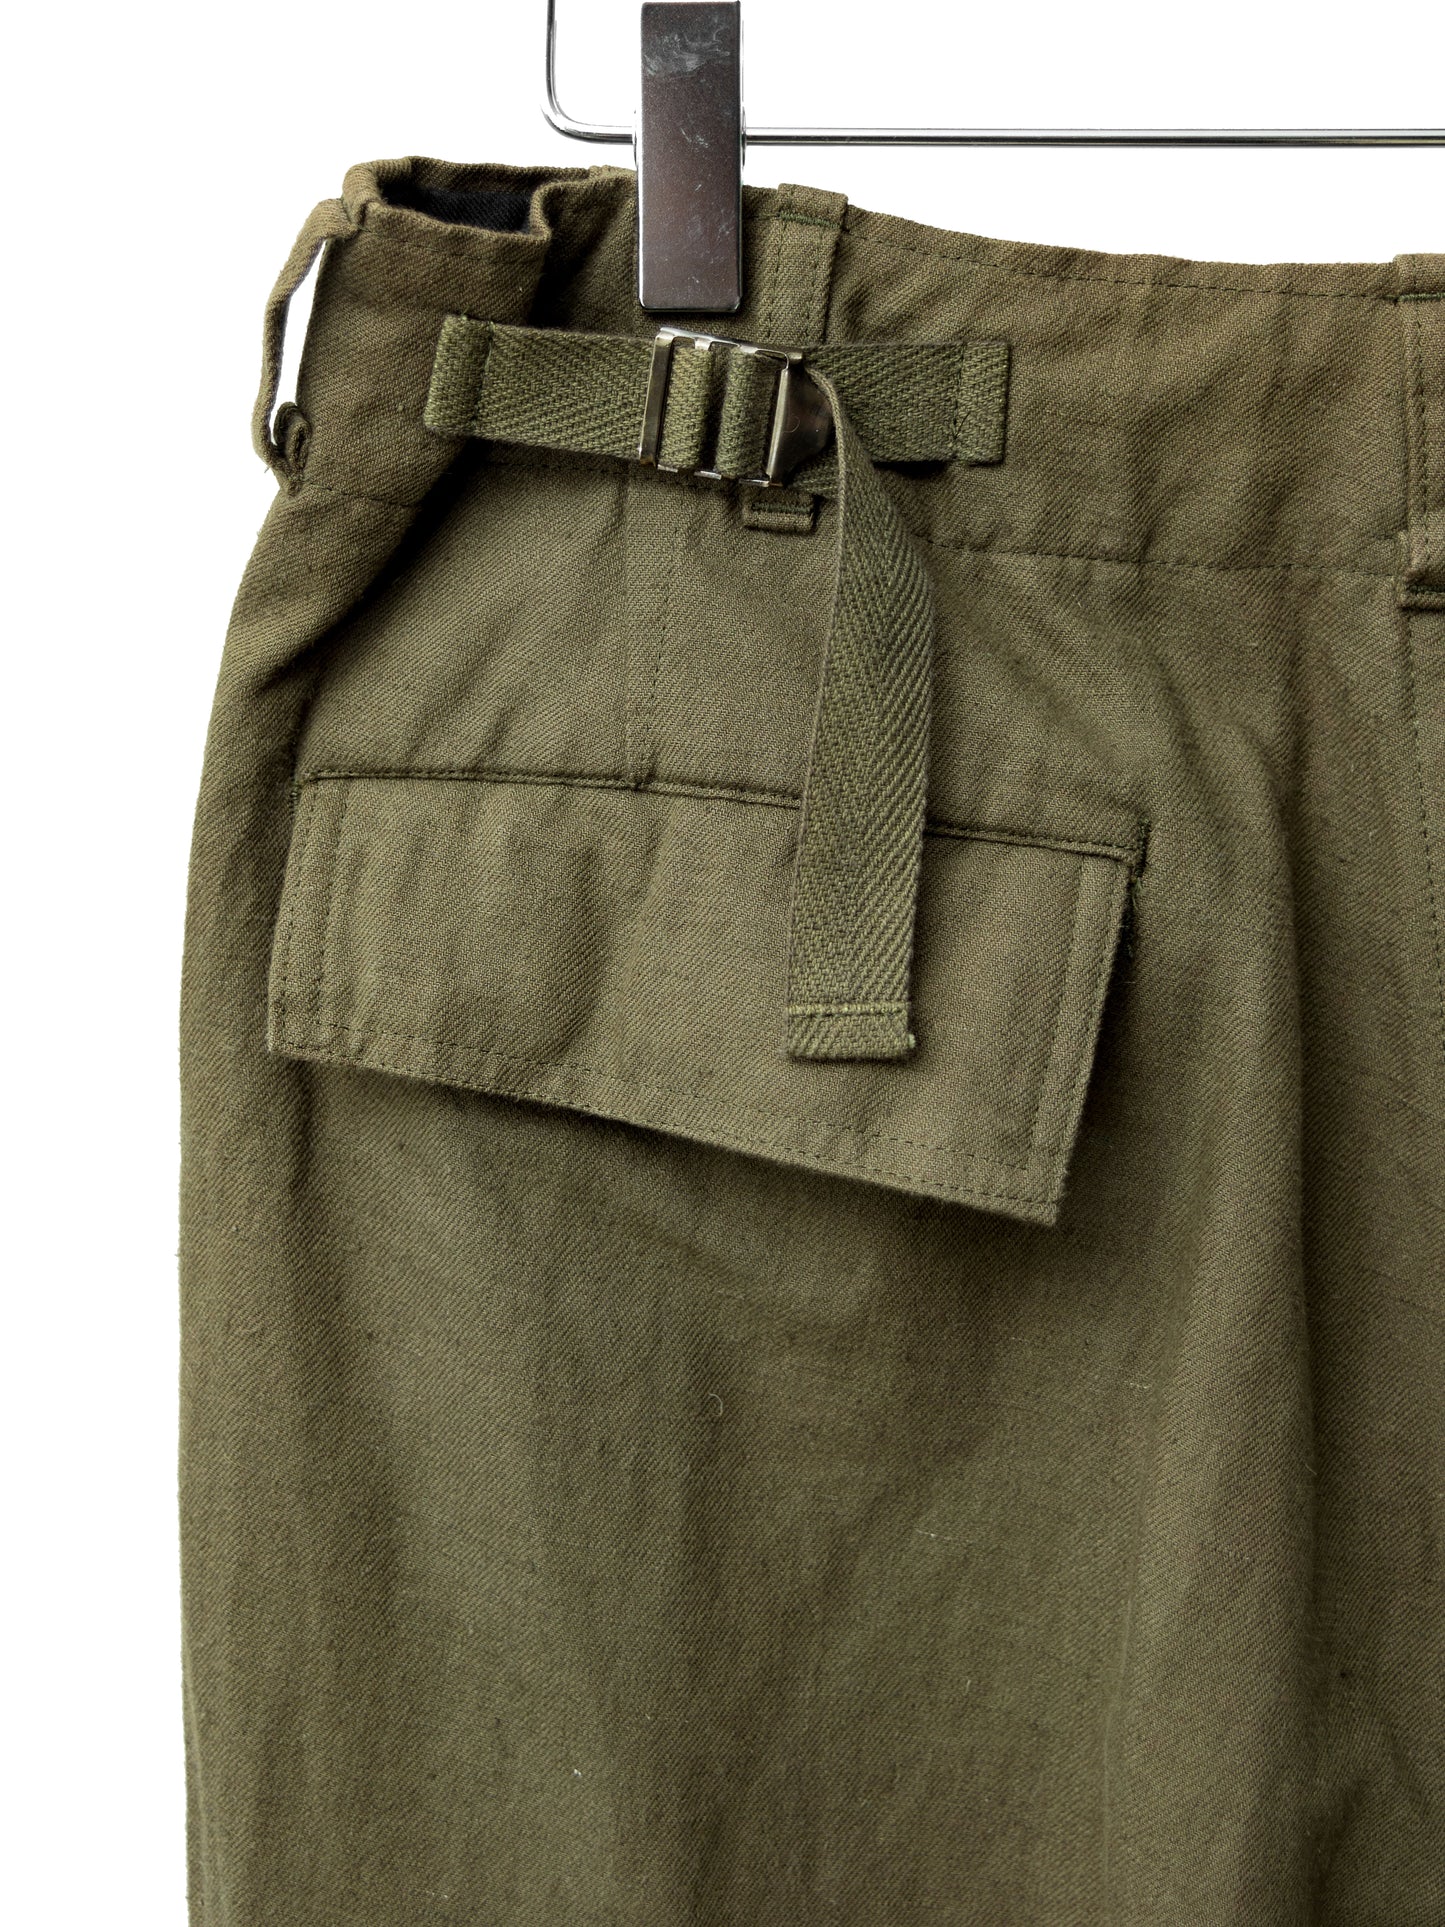 military pants olive drab ∙ linen cotton ∙ small